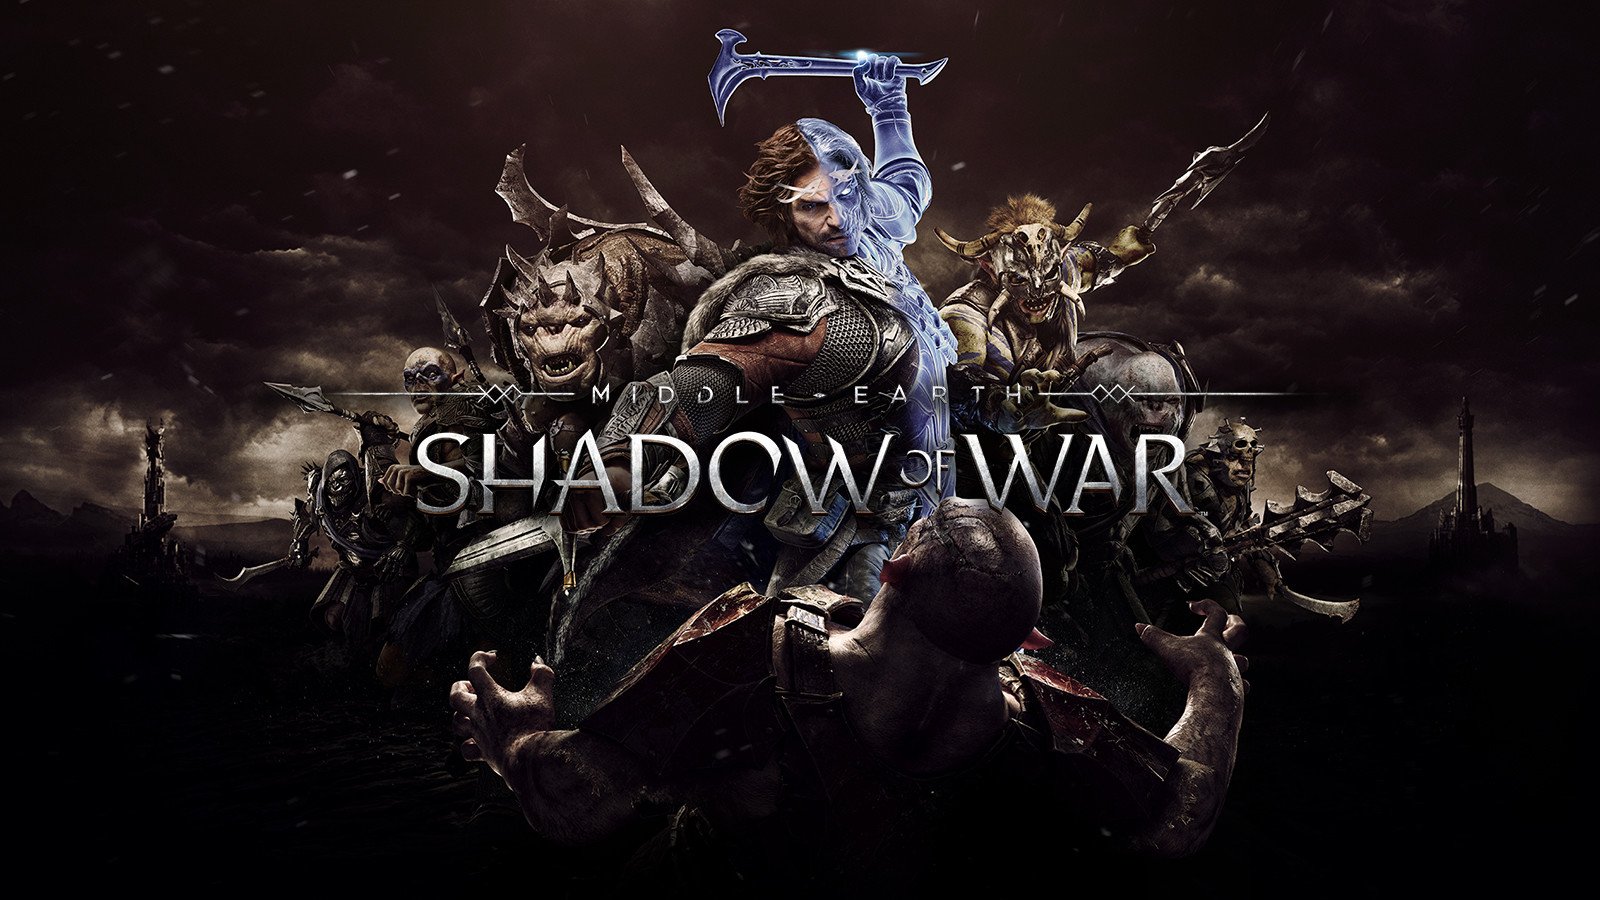 Middle-earth: Shadow of War is getting some free content soon ...